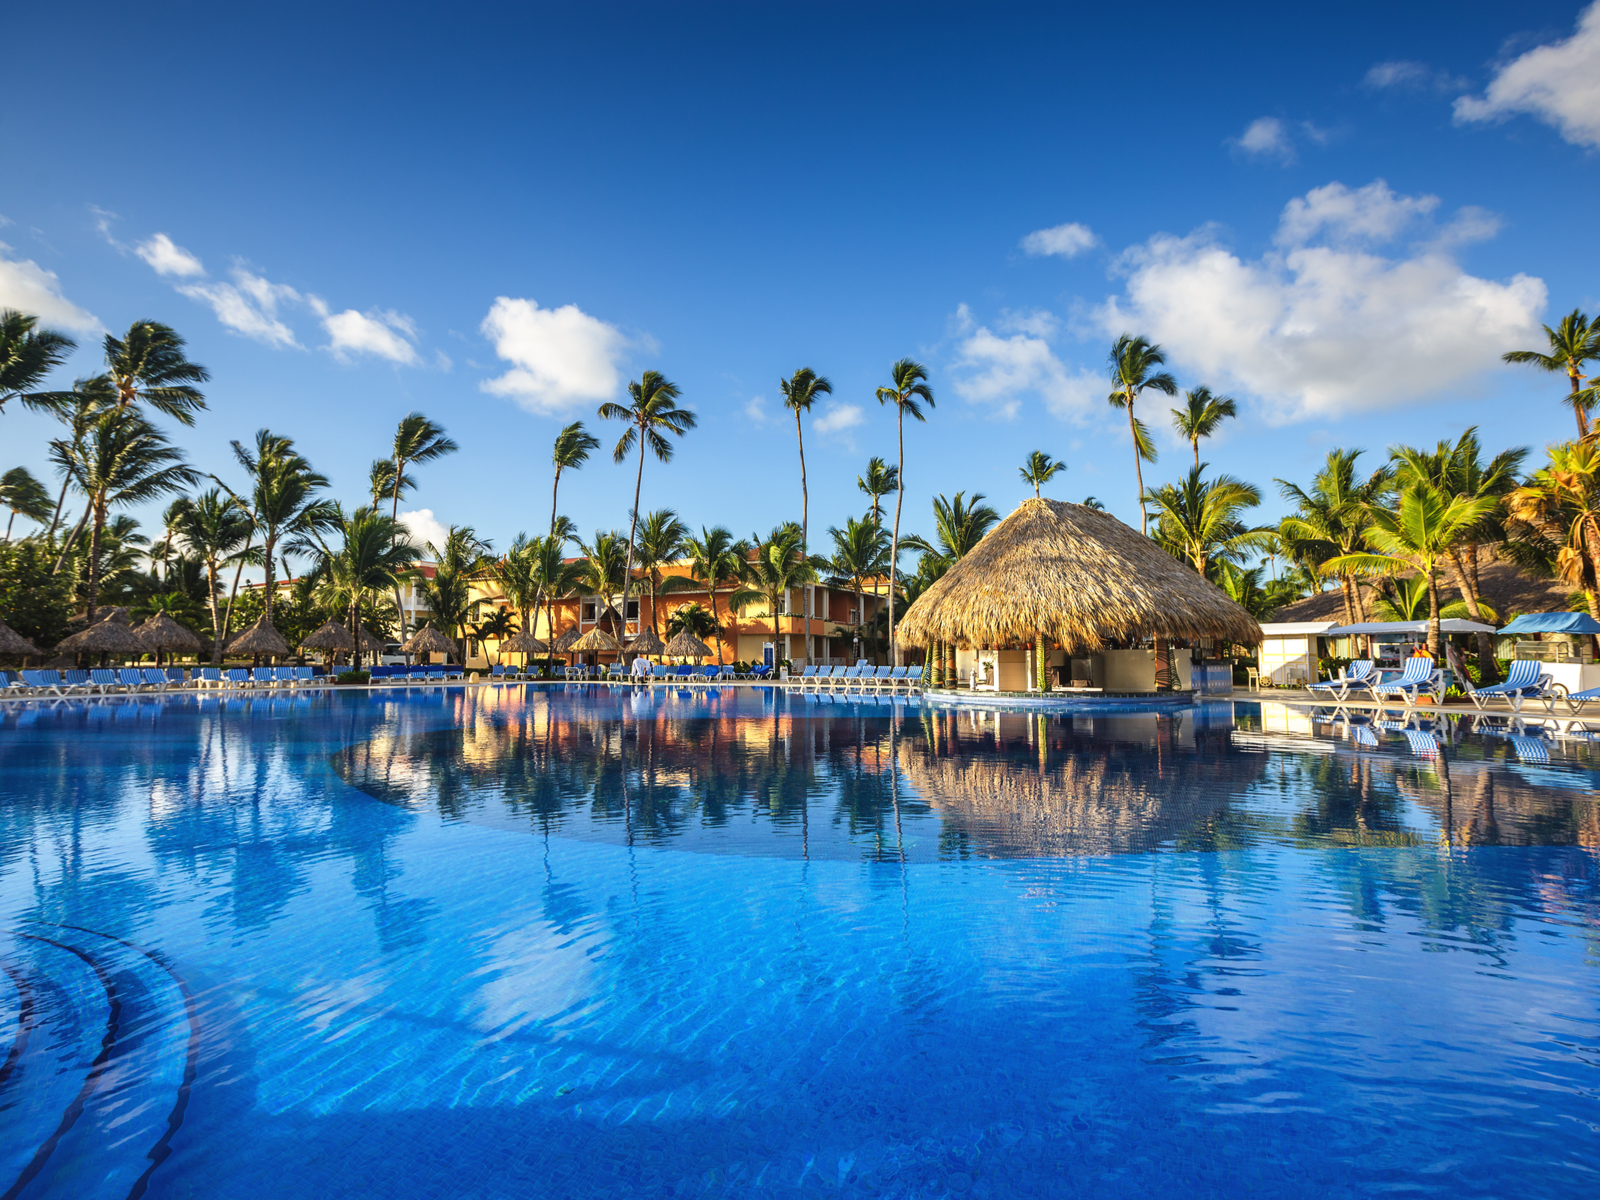 A native hut and tall palm trees reflected on the clear blue pool in one of the best all-inclusive resorts in Punta Cana